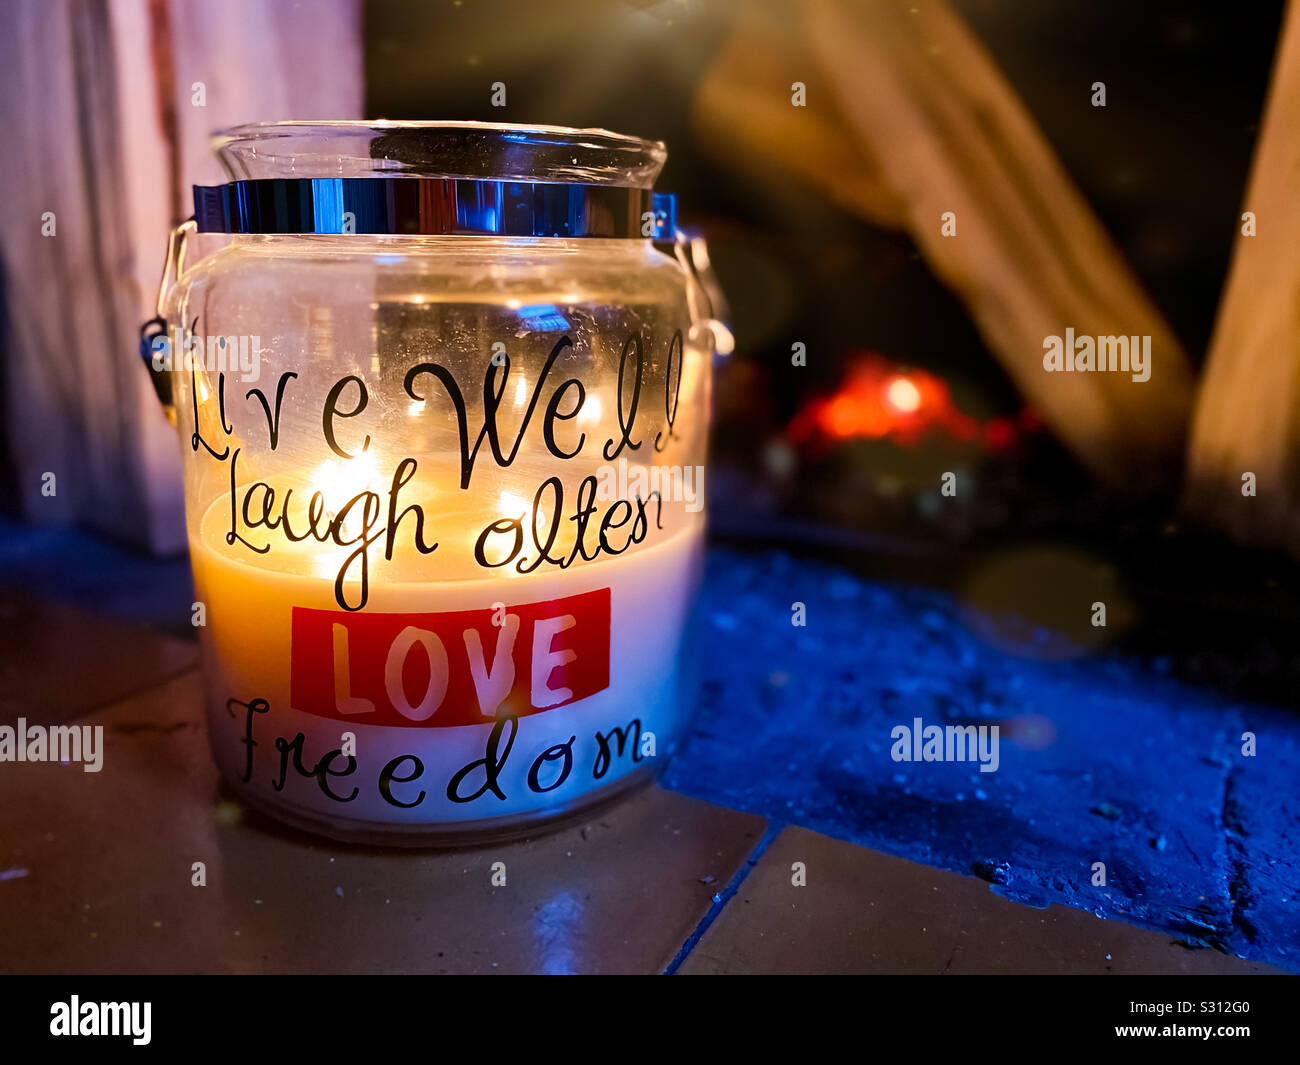 Live well, Laugh often, Love Freedom Stock Photo